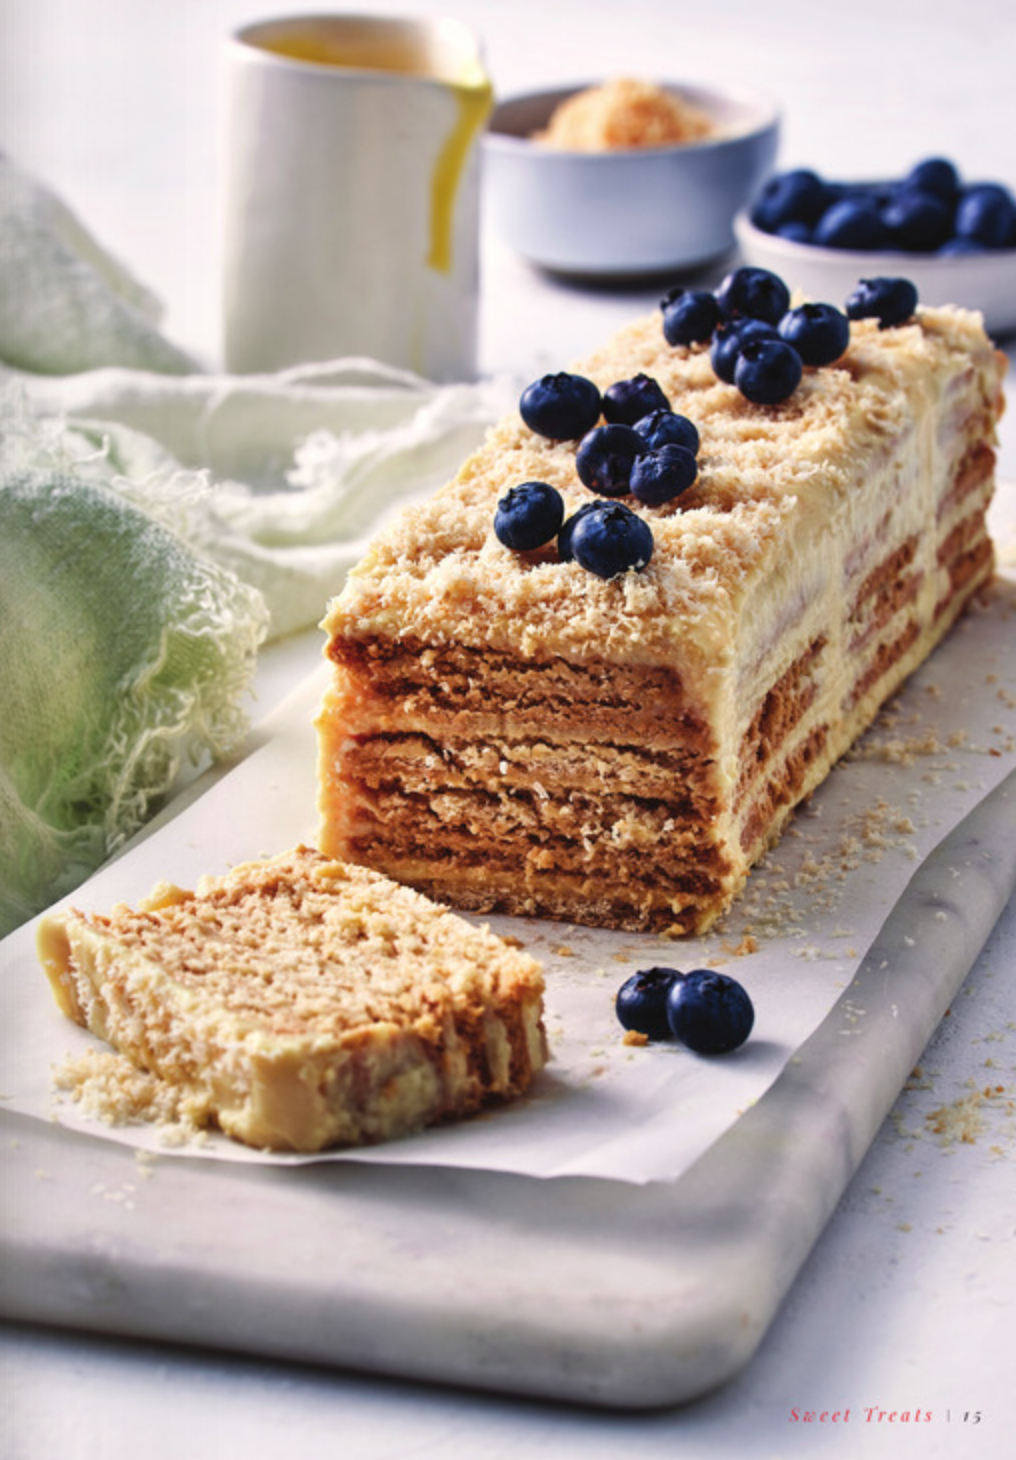 Tennis Custard Layer Cake with Tennis Biscuits